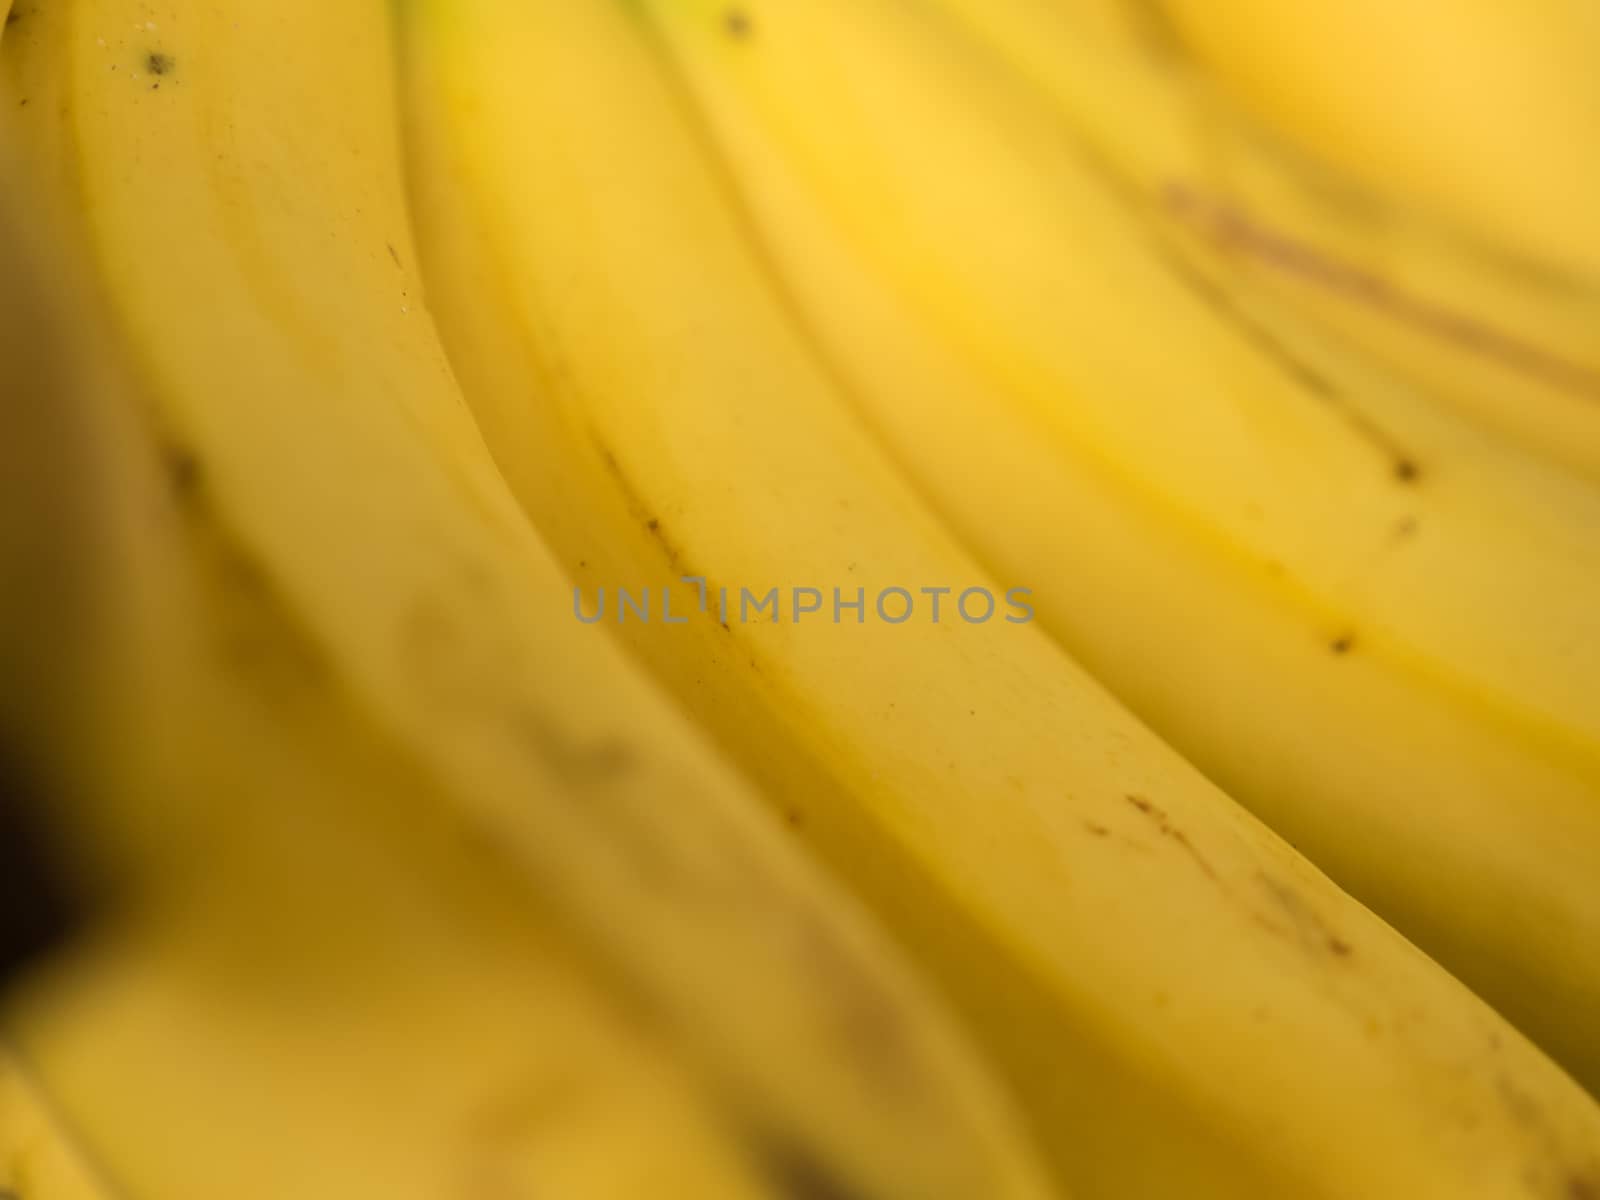 close up view of banana in its skin